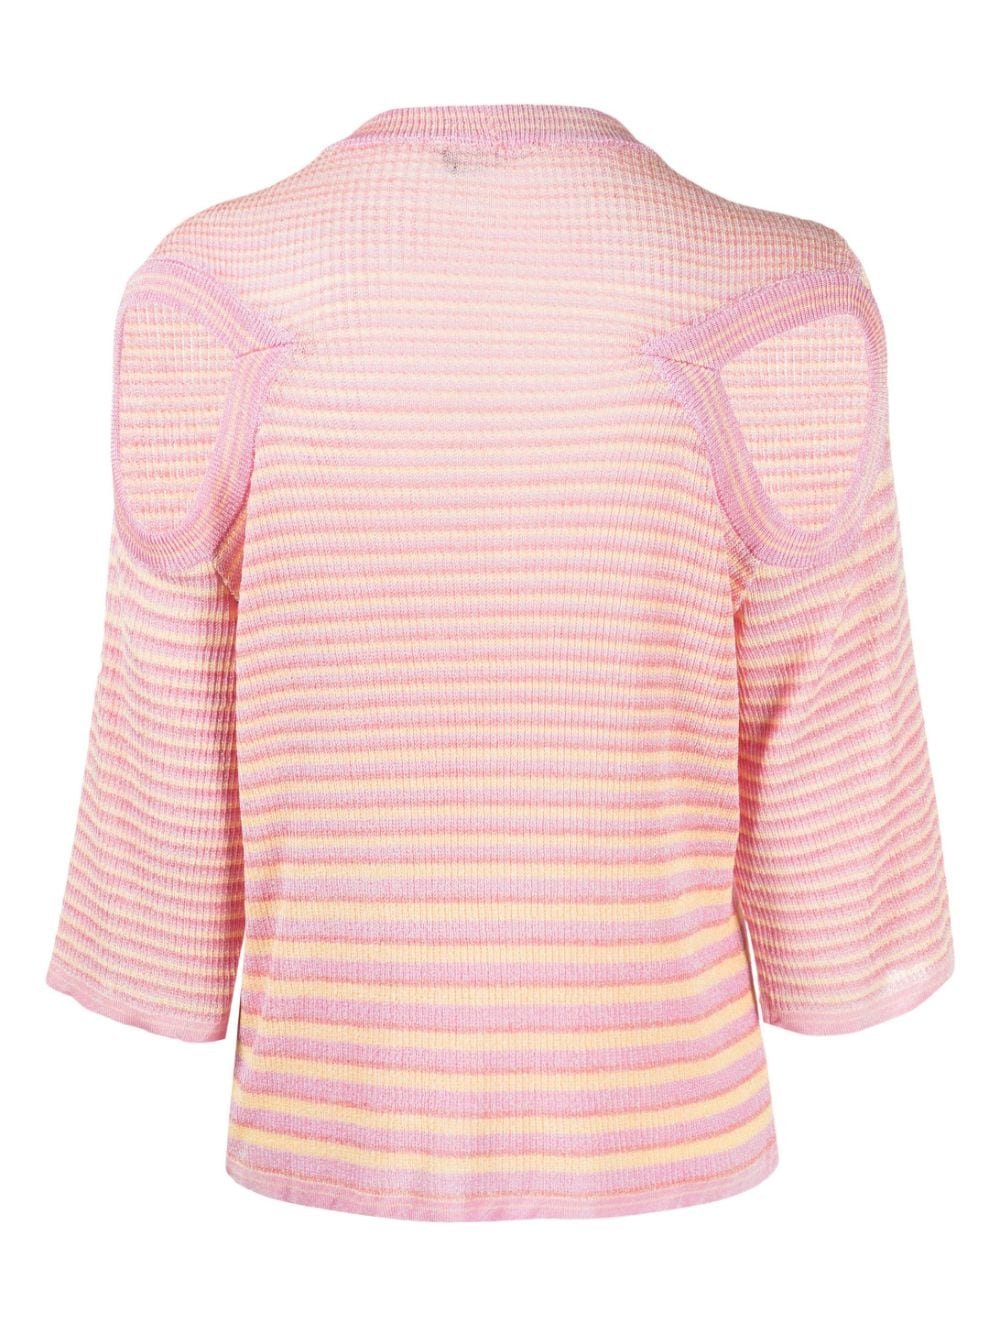 STRIPED CUT-OUT KNITTED TOP - SHEET-1